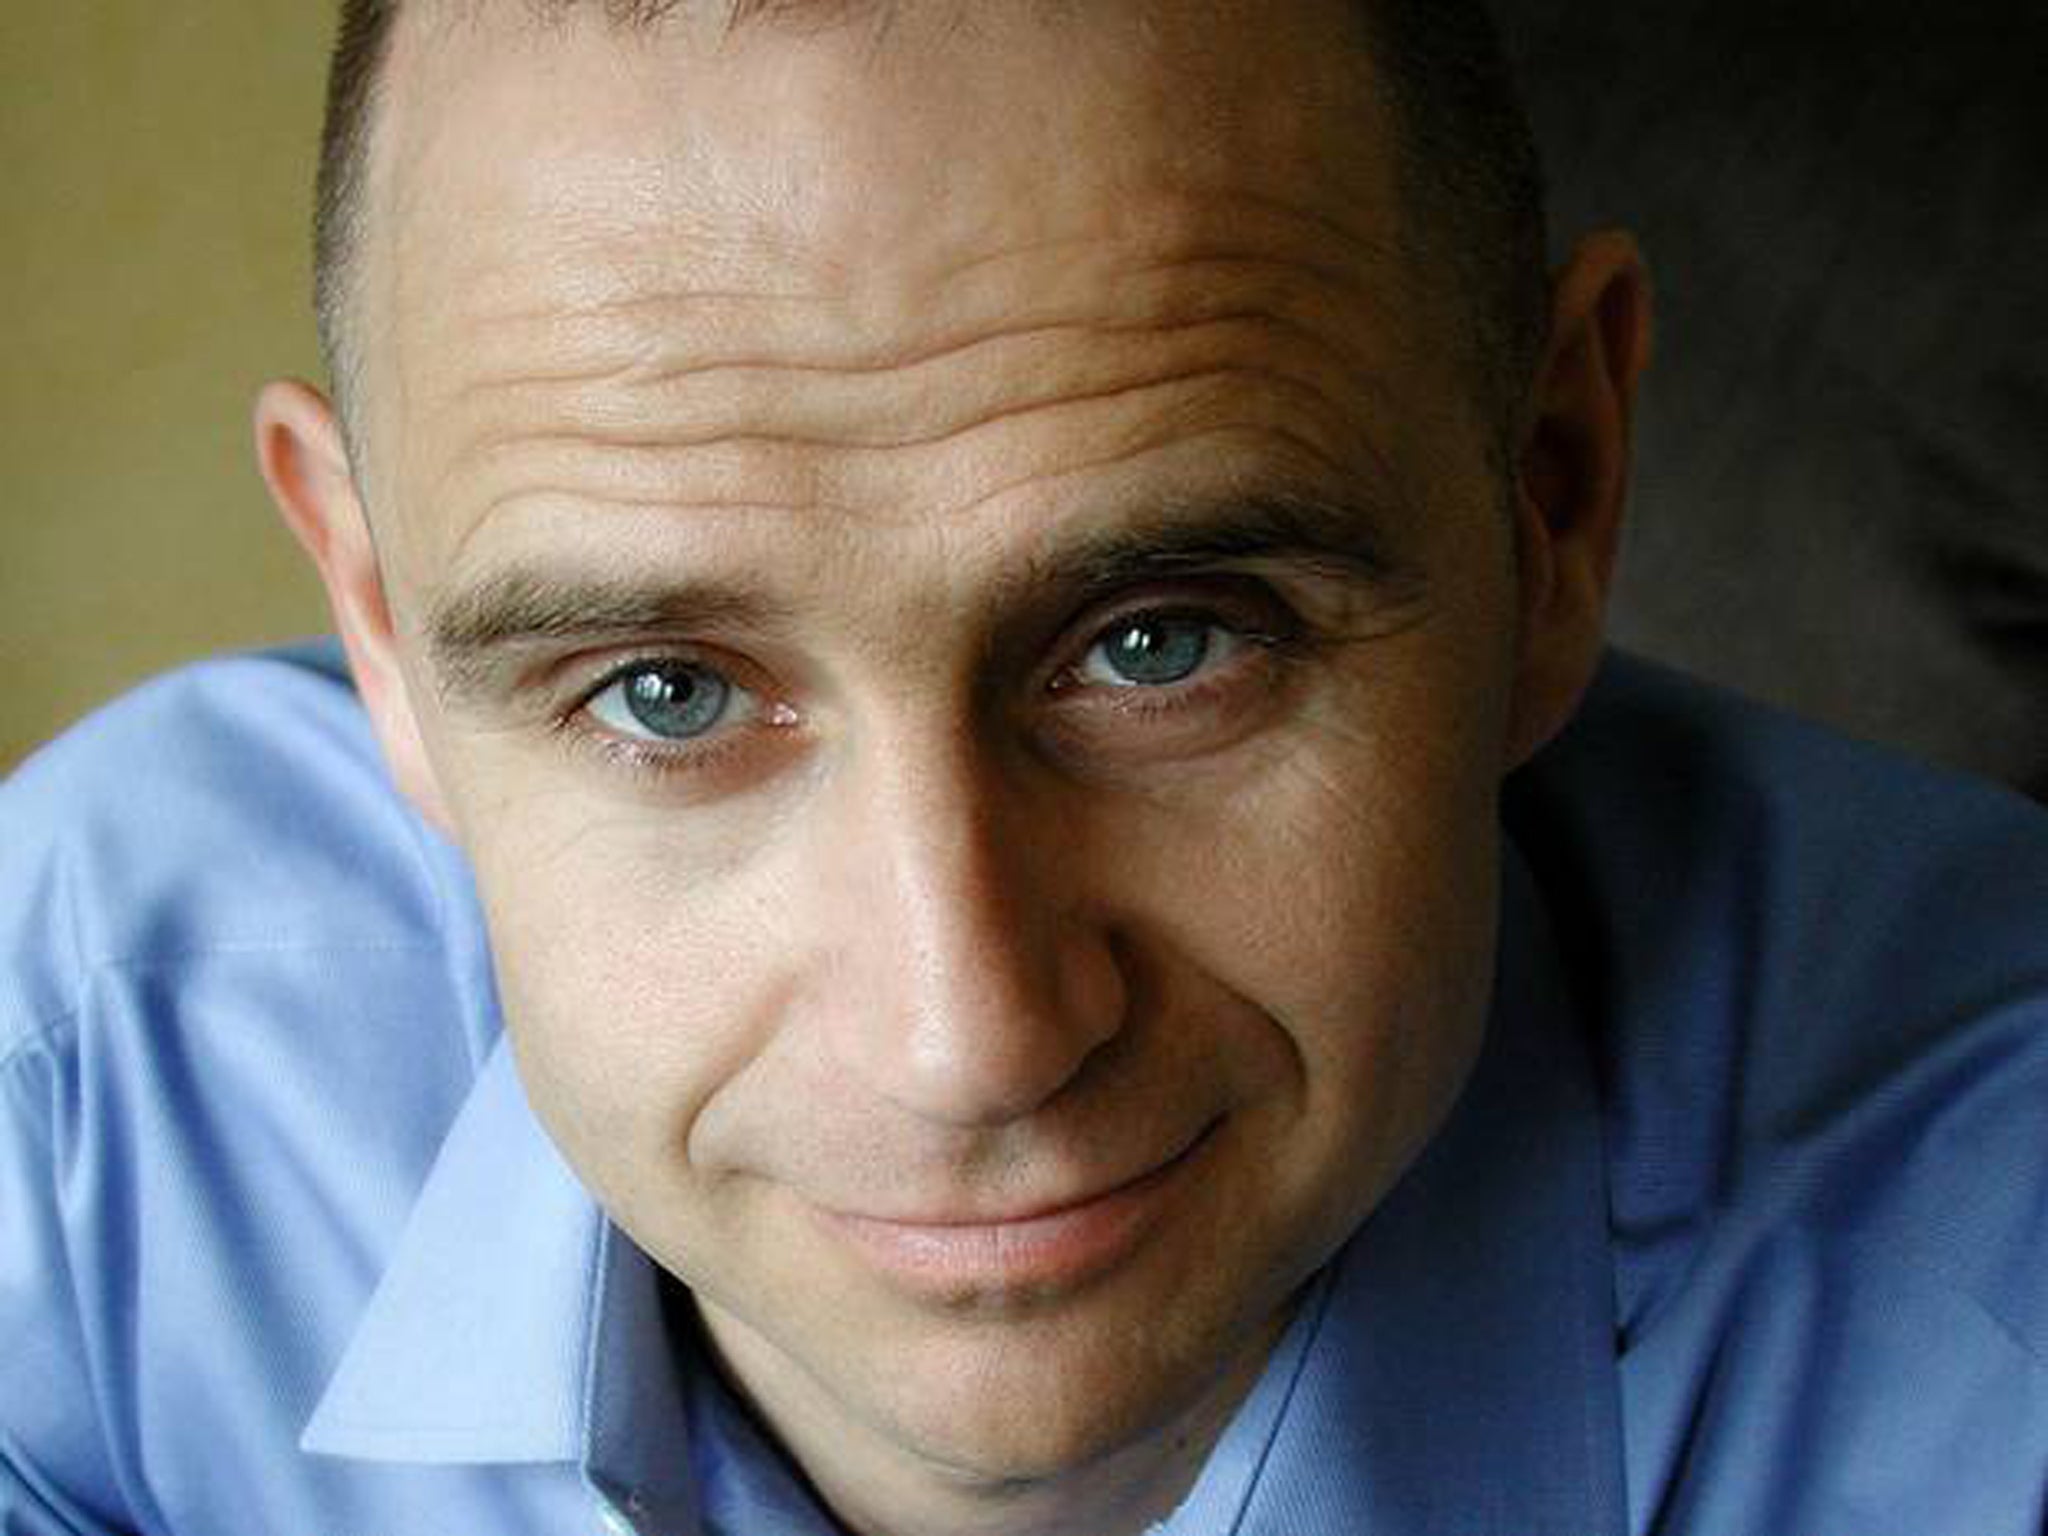 Radio 4's Today programme host Evan Davis has been announced as the new face of Newsnight